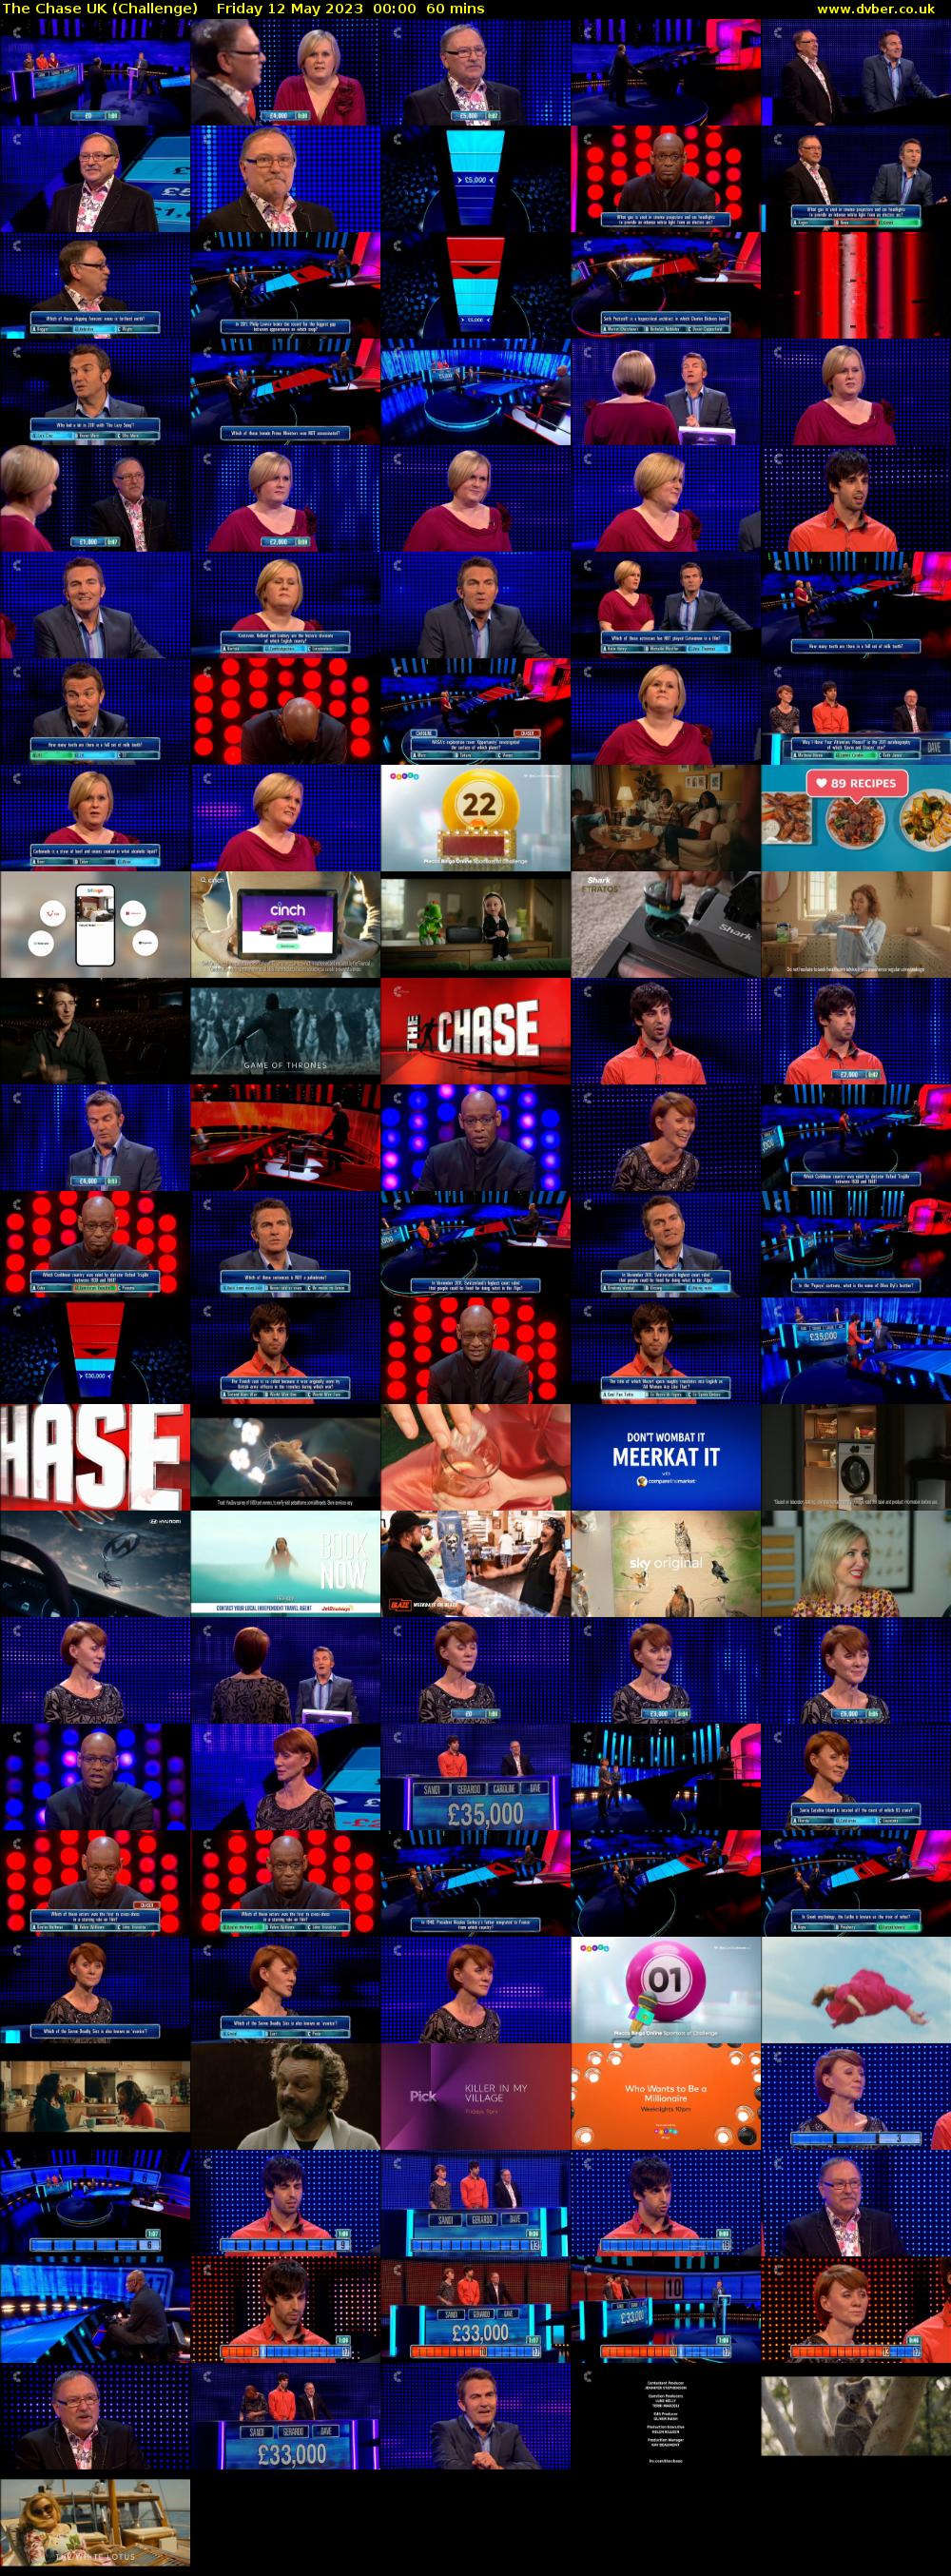 The Chase UK (Challenge) Friday 12 May 2023 00:00 - 01:00